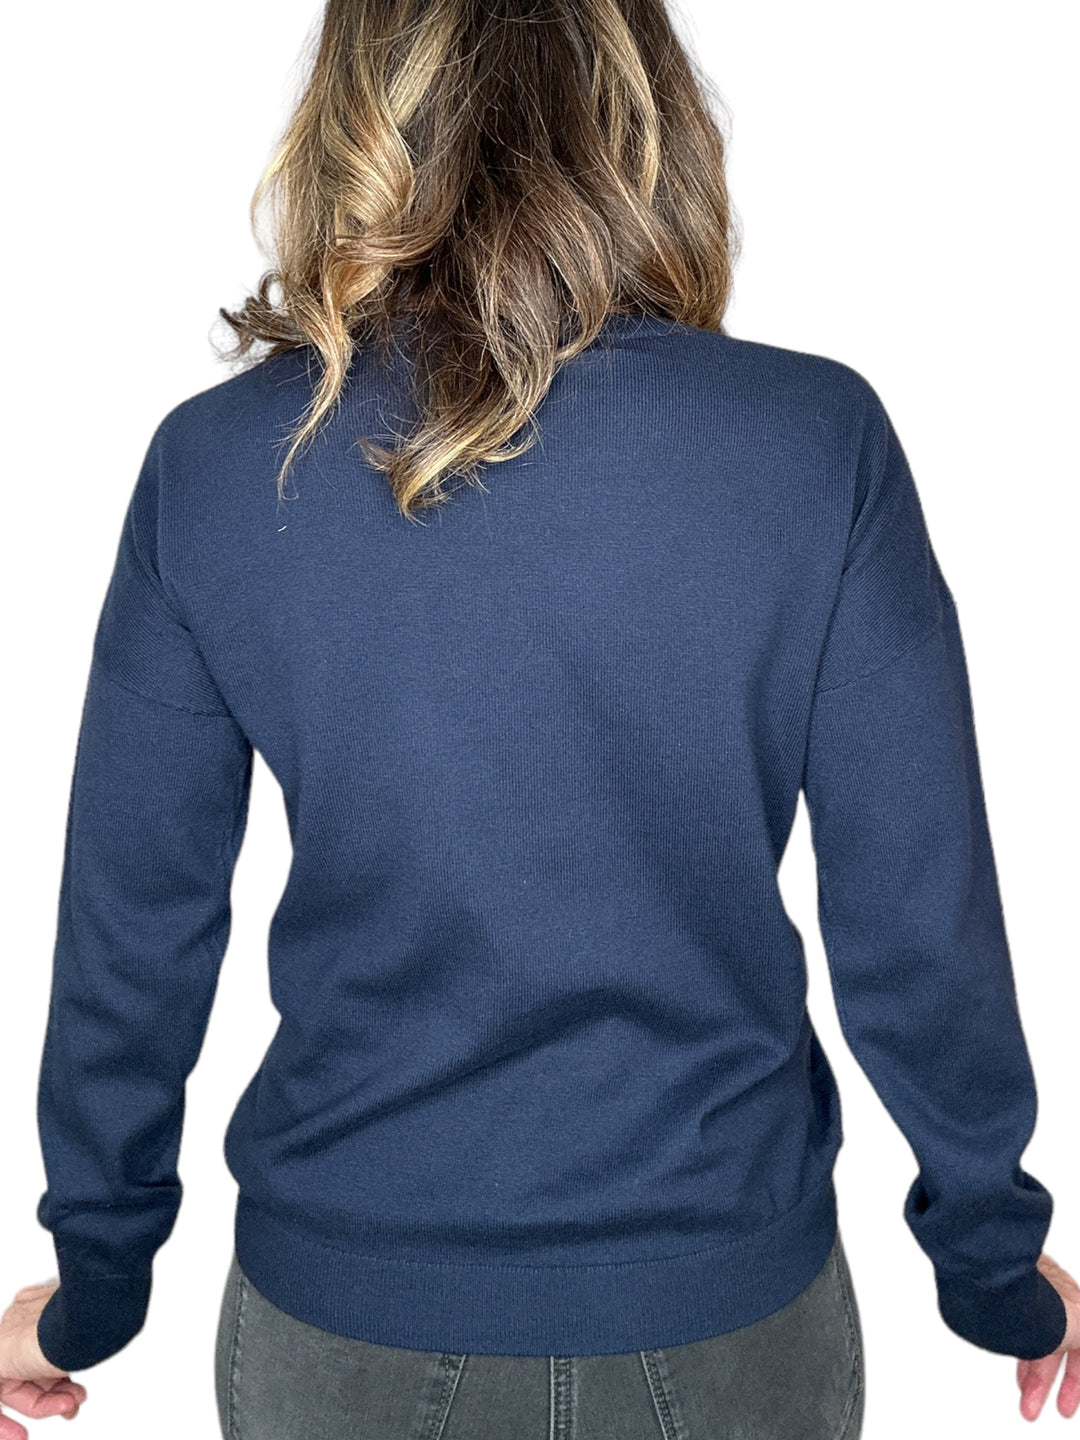 LOVE CREW SWEATER-NAVY - Kingfisher Road - Online Boutique